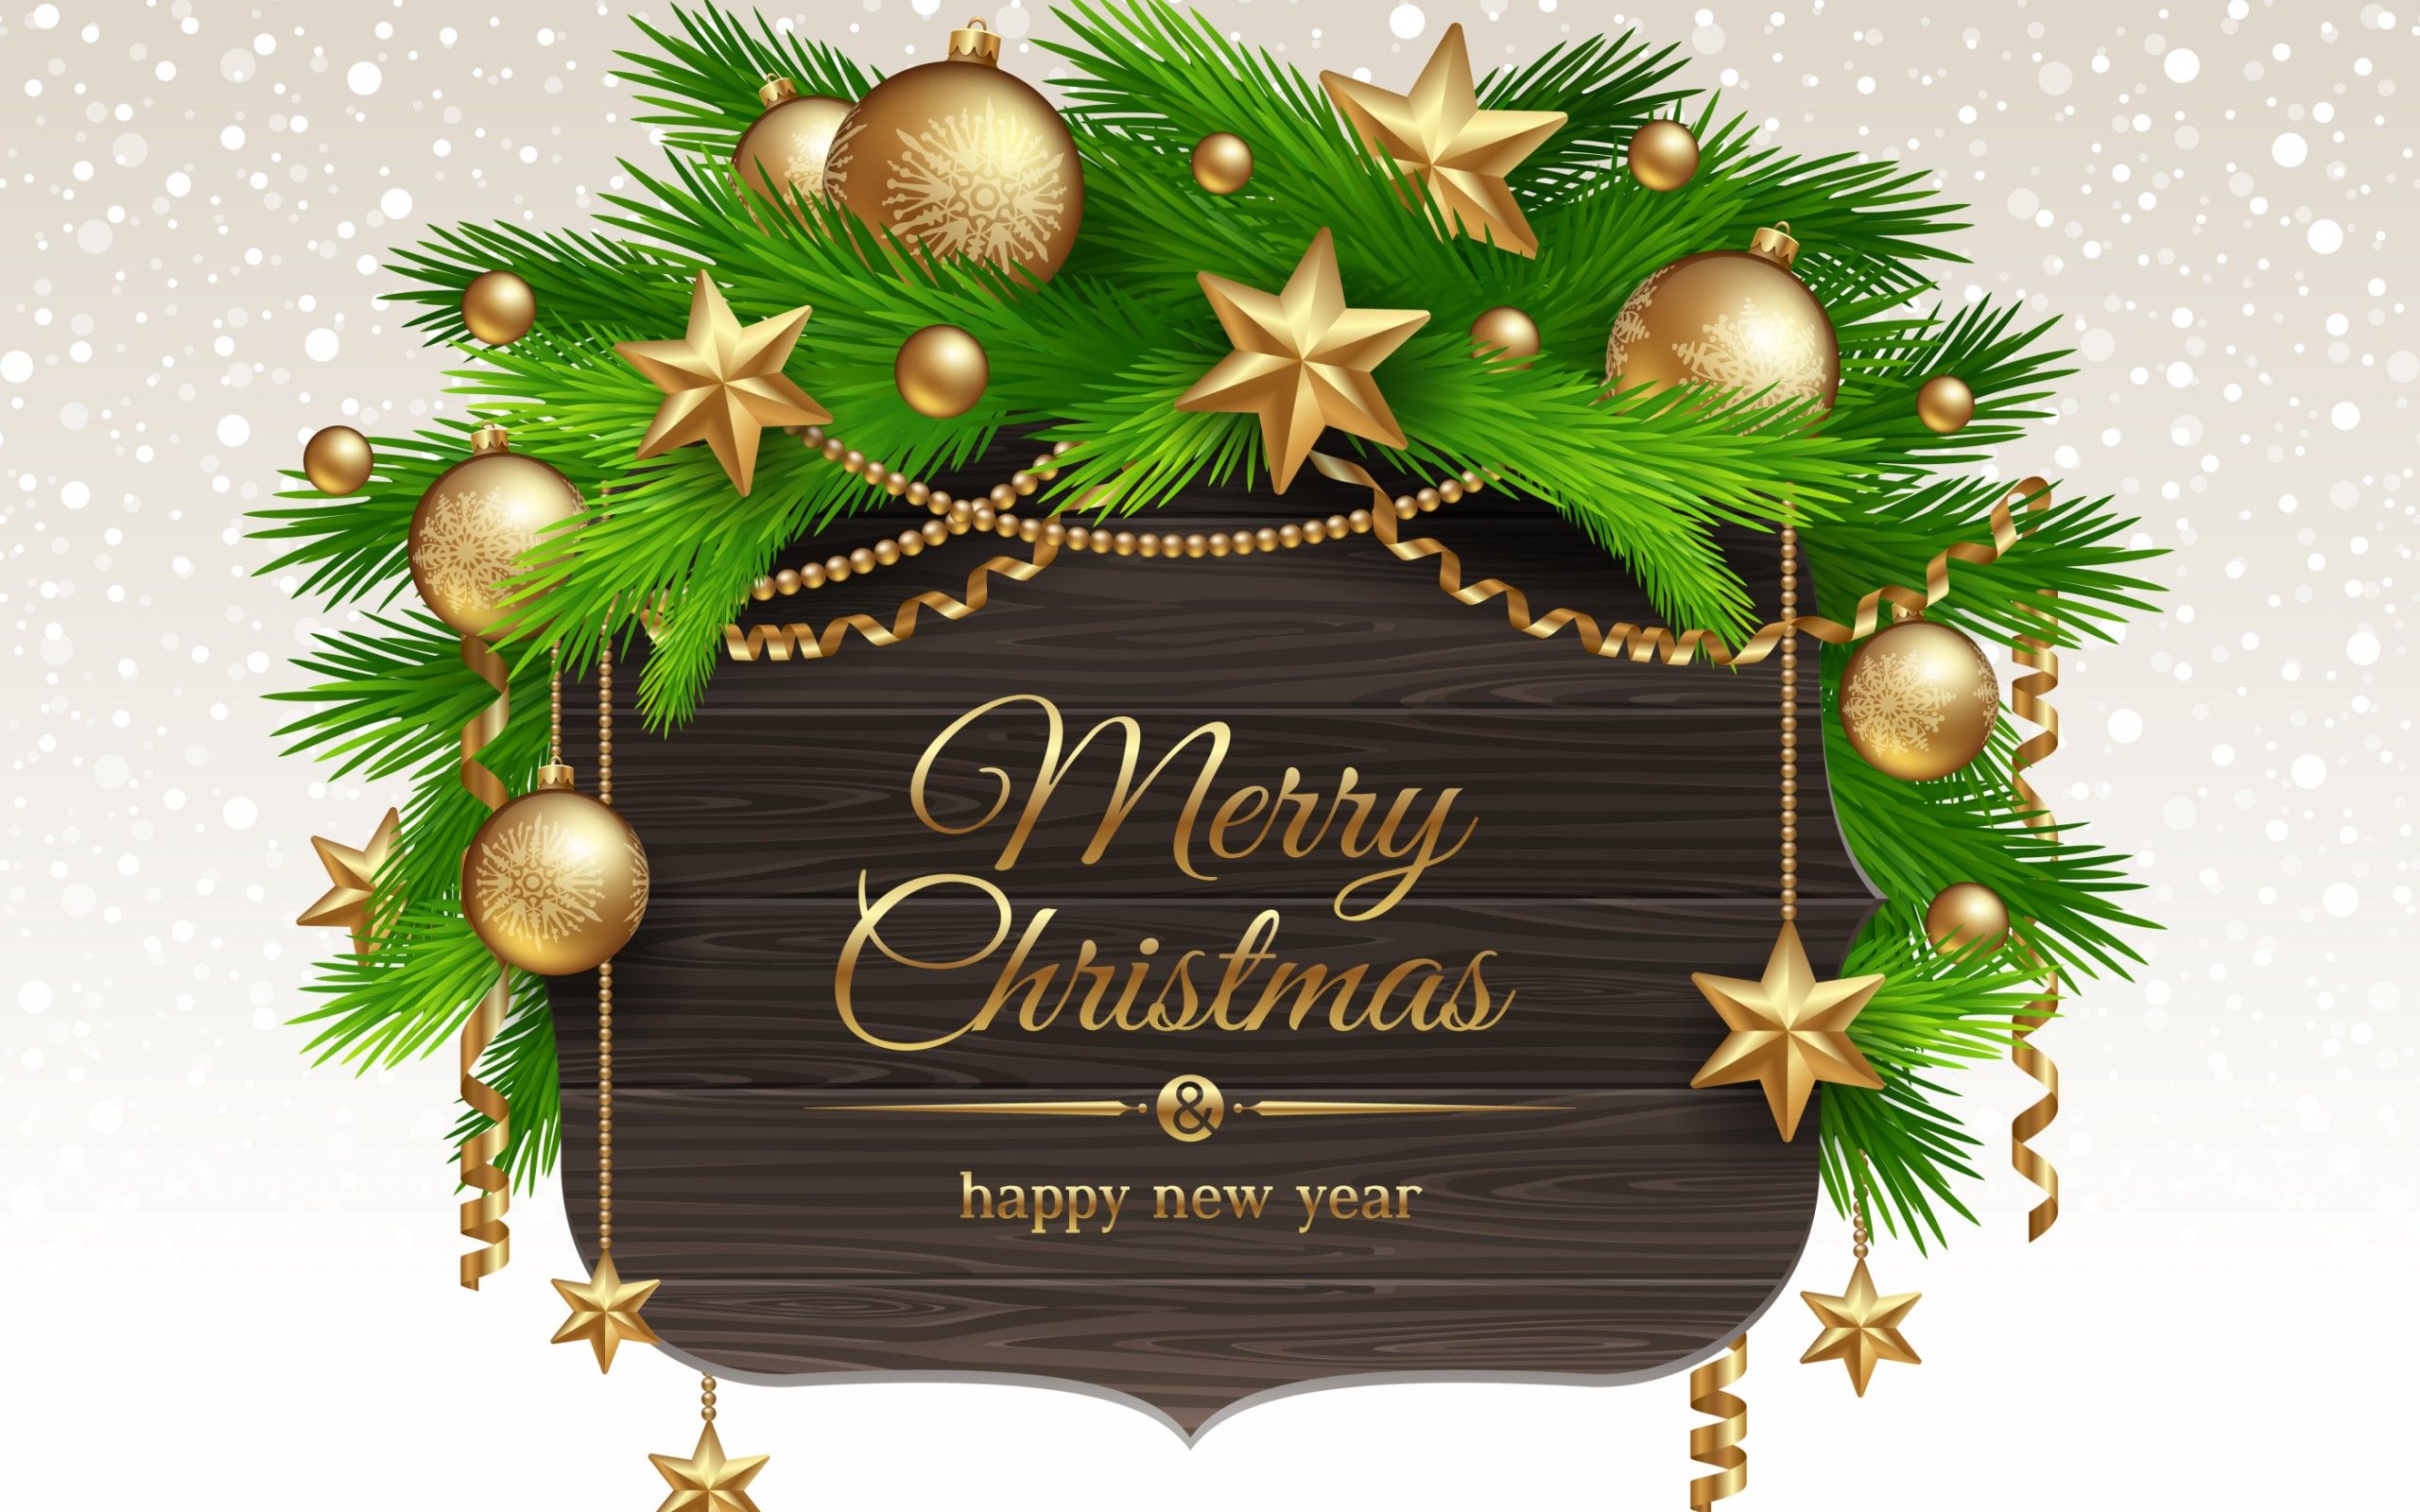 Christmas Christmas Ornaments Decoration Golden Happy New Year Holiday Merry Christmas New Year Star Wallpaper:2560x1600